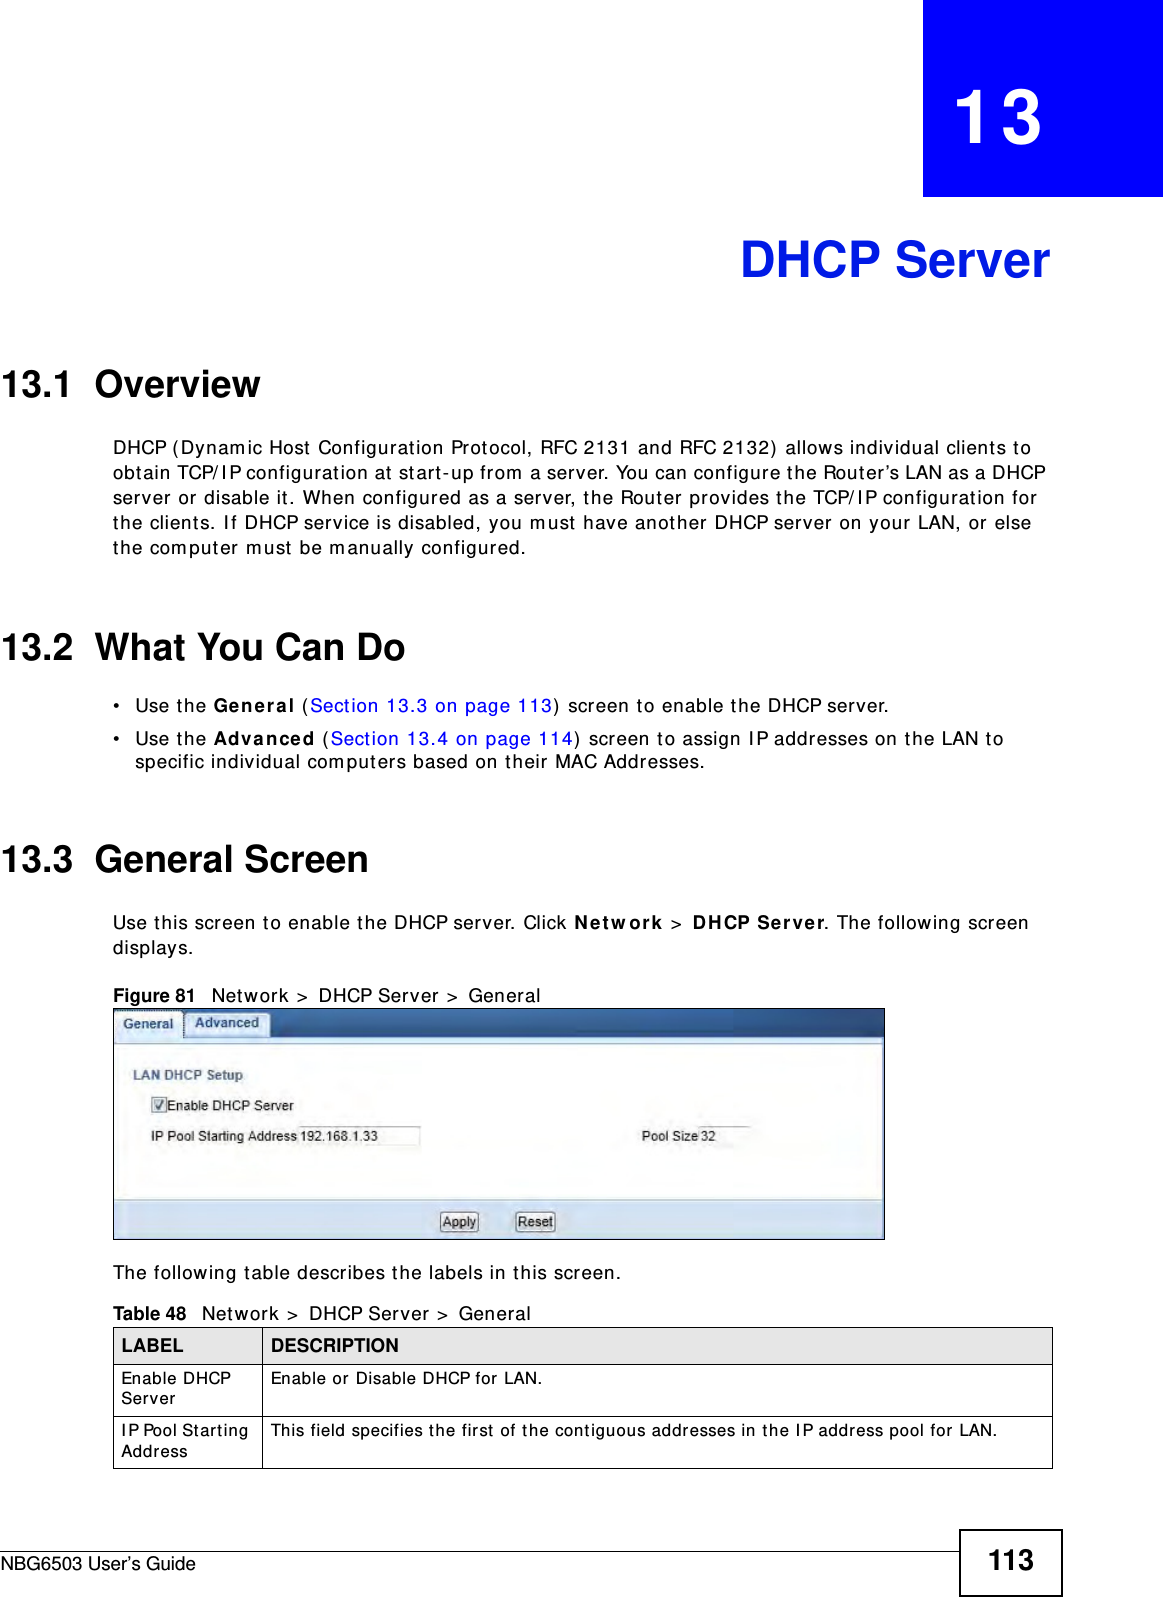 NBG6503 User’s Guide 113CHAPTER   13DHCP Server13.1  OverviewDHCP (Dynamic Host Configuration Protocol, RFC 2131 and RFC 2132) allows individual clients to obtain TCP/IP configuration at start-up from a server. You can configure the Router’s LAN as a DHCP server or disable it. When configured as a server, the Router provides the TCP/IP configuration for the clients. If DHCP service is disabled, you must have another DHCP server on your LAN, or else the computer must be manually configured.13.2  What You Can Do•Use the General (Section 13.3 on page 113) screen to enable the DHCP server.•Use the Advanced (Section 13.4 on page 114) screen to assign IP addresses on the LAN to specific individual computers based on their MAC Addresses.13.3  General ScreenUse this screen to enable the DHCP server. Click Network &gt; DHCP Server. The following screen displays.Figure 81   Network &gt; DHCP Server &gt; General   The following table describes the labels in this screen.Table 48   Network &gt; DHCP Server &gt; General LABEL DESCRIPTIONEnable DHCP Server Enable or Disable DHCP for LAN.IP Pool Starting Address This field specifies the first of the contiguous addresses in the IP address pool for LAN.